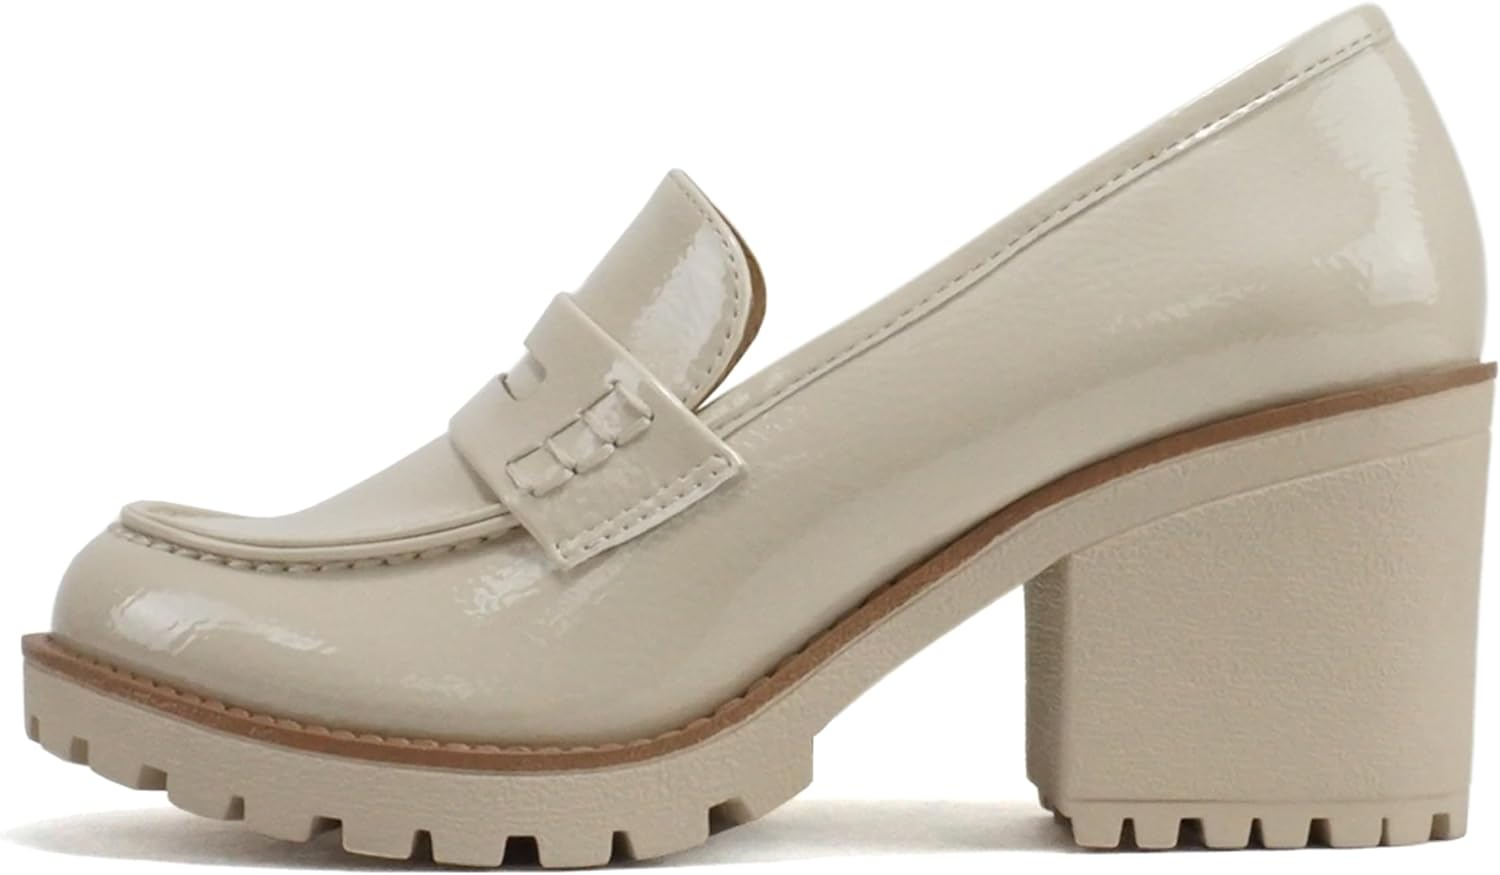 “Kinder” ~ Women Slip On Chunky Mid Heel Lug Sole Penny Loafer Shoe The perfect addition to any look, this mini paper-bag style clutch features an exaggerated chain detail and adjustable strap in a soft leather fabrication.